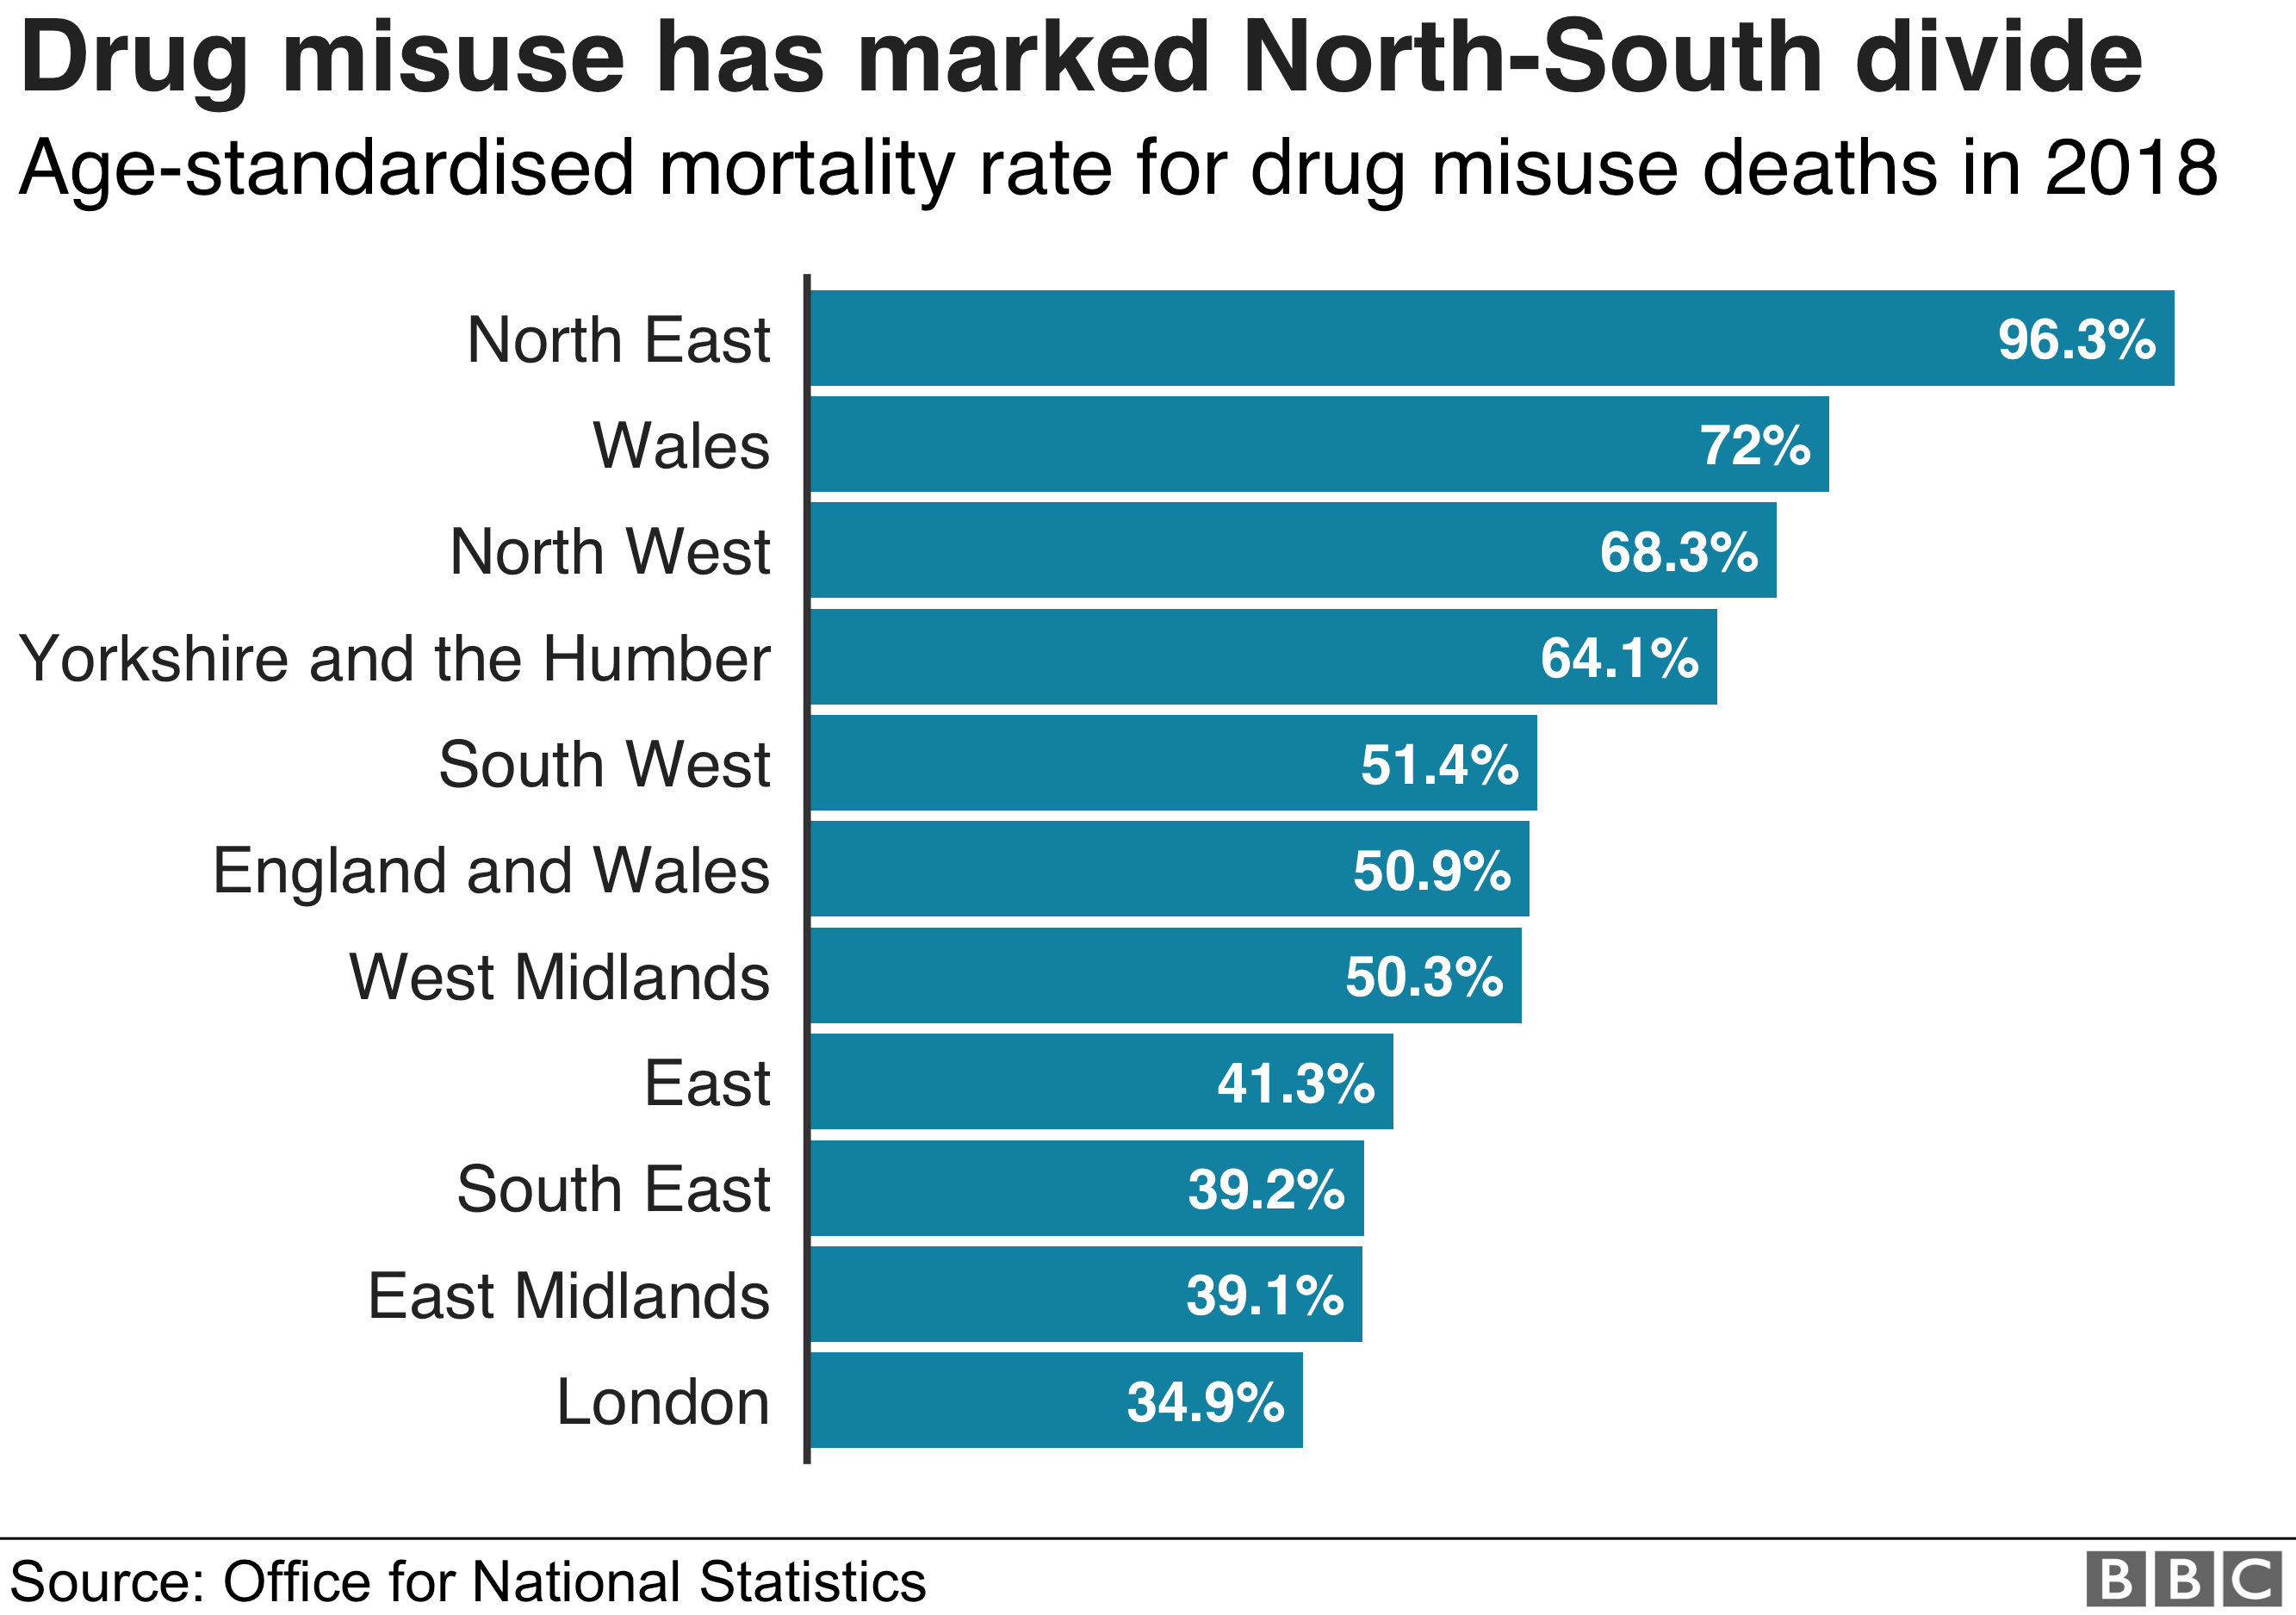 Chart showing mortality rates for drug misuse deaths in England and Wales by region